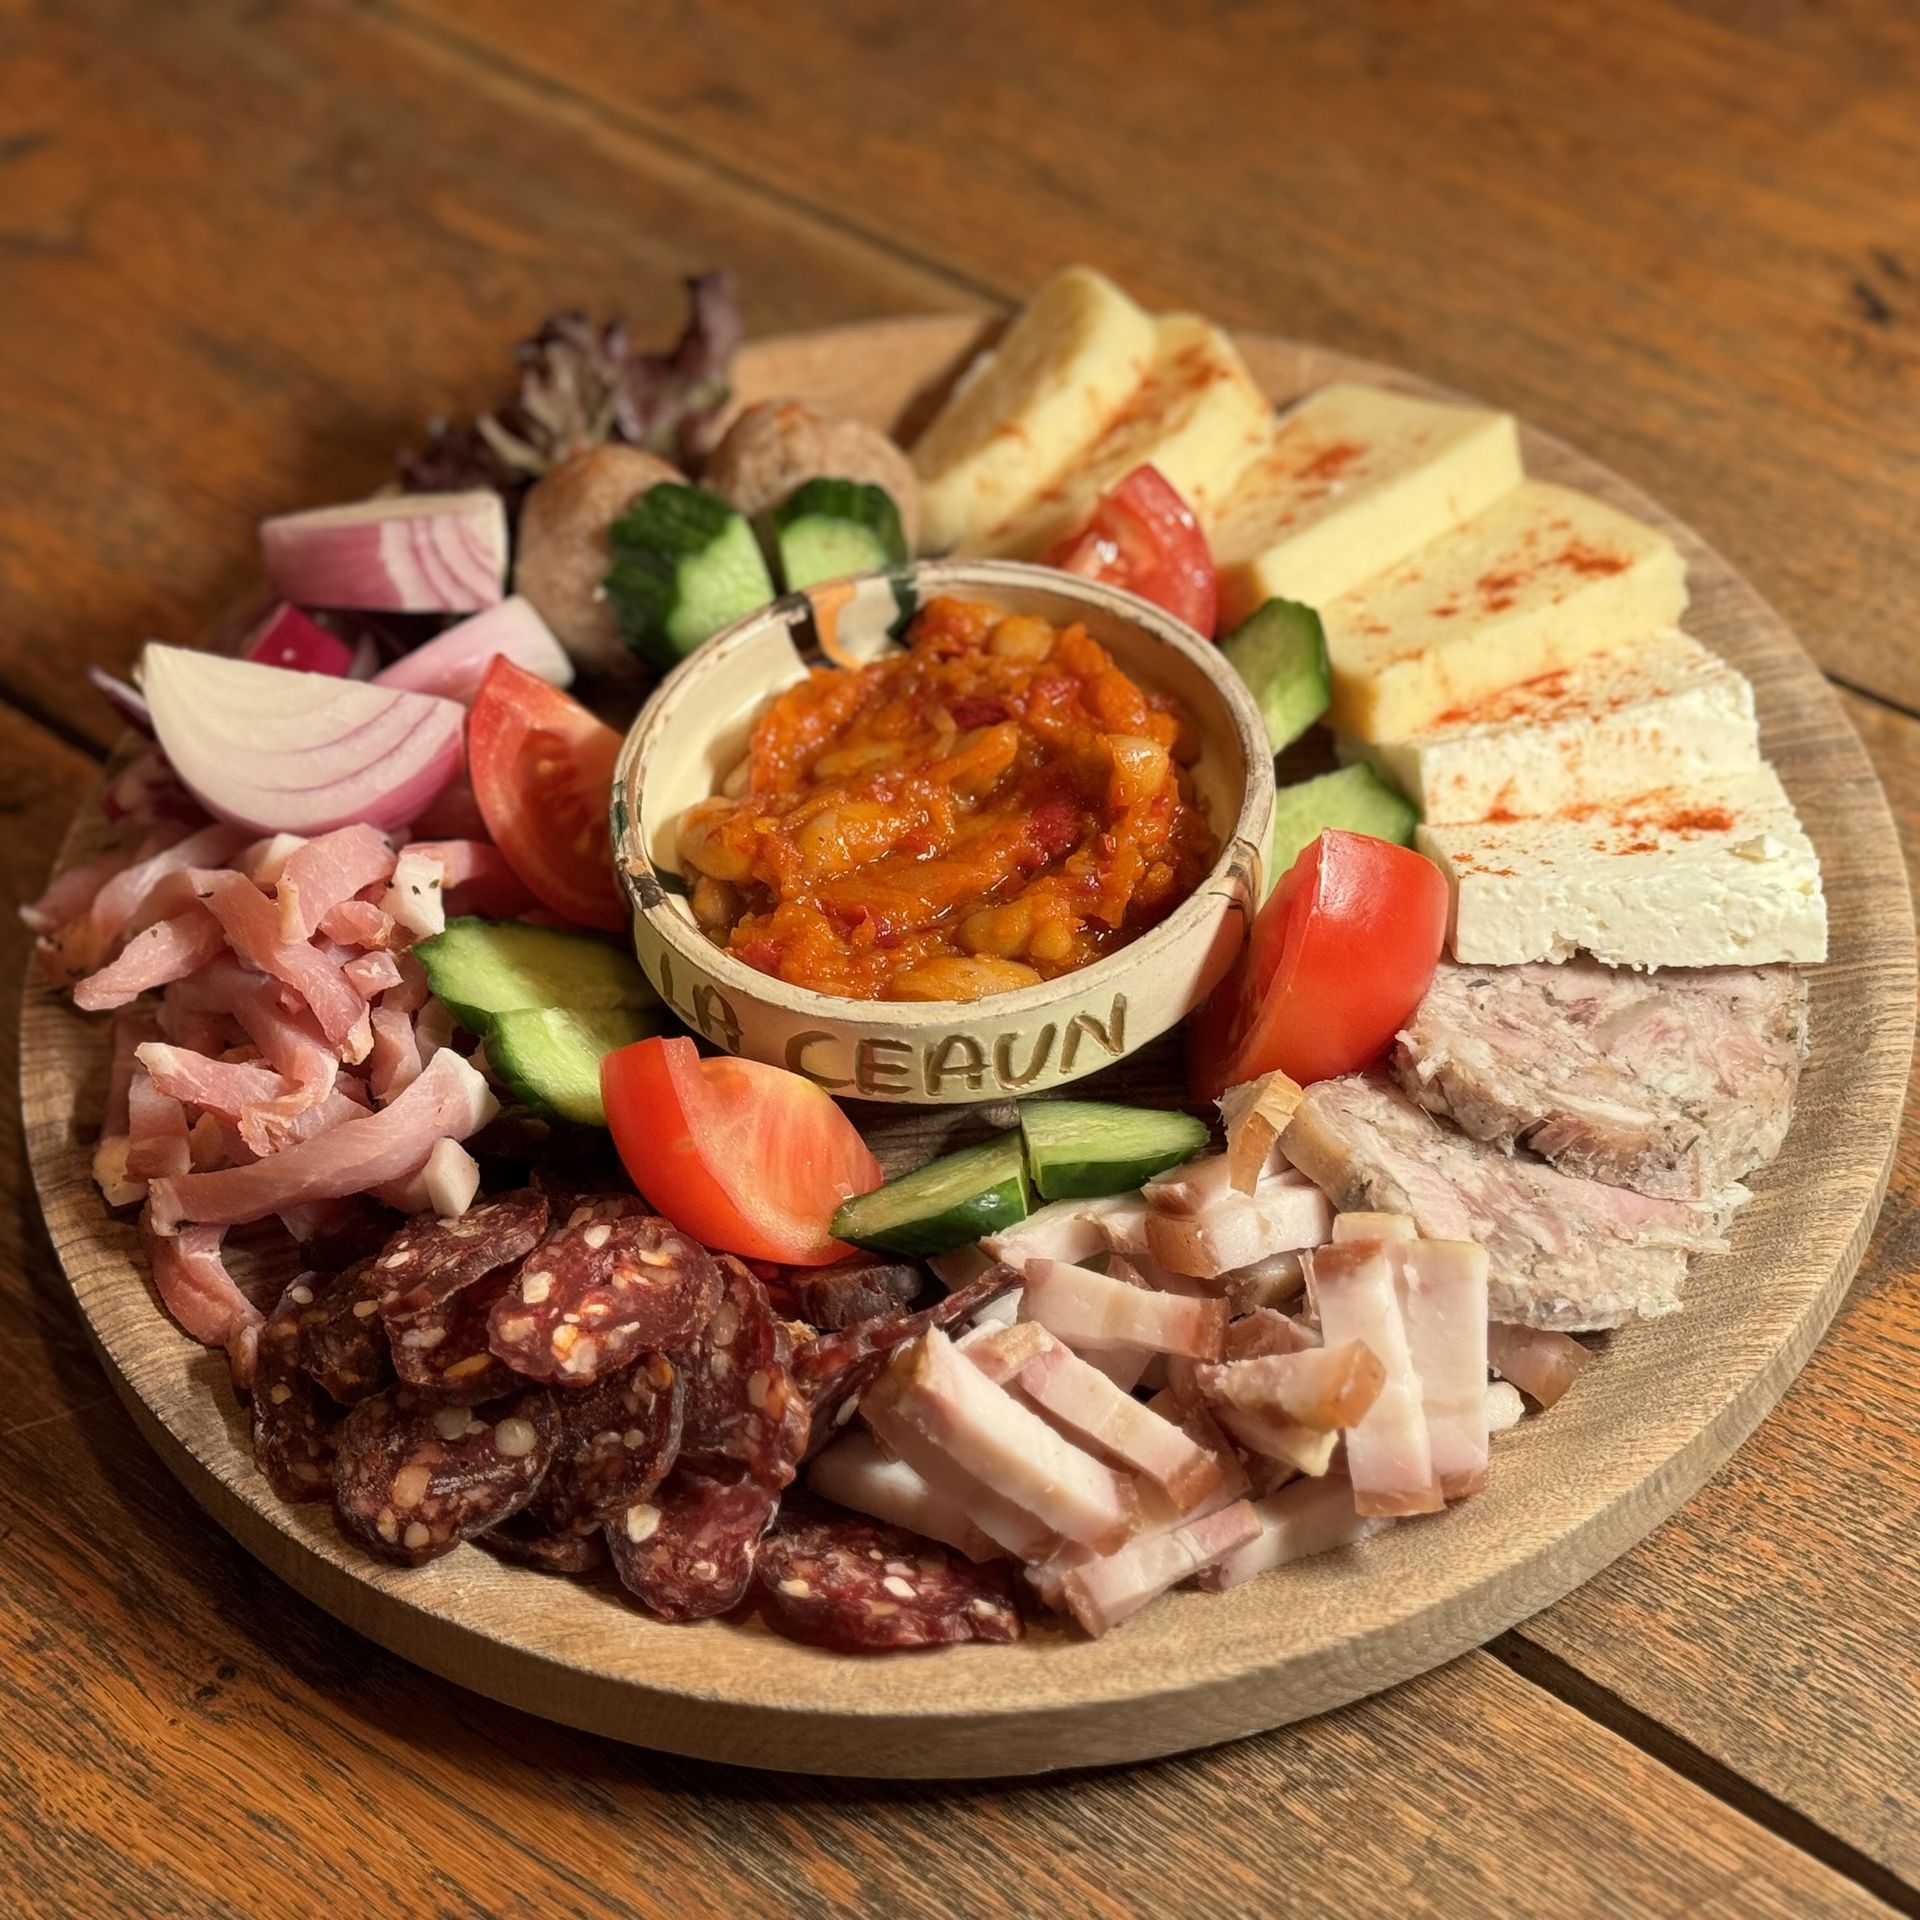 Peasant's plate - 650 g